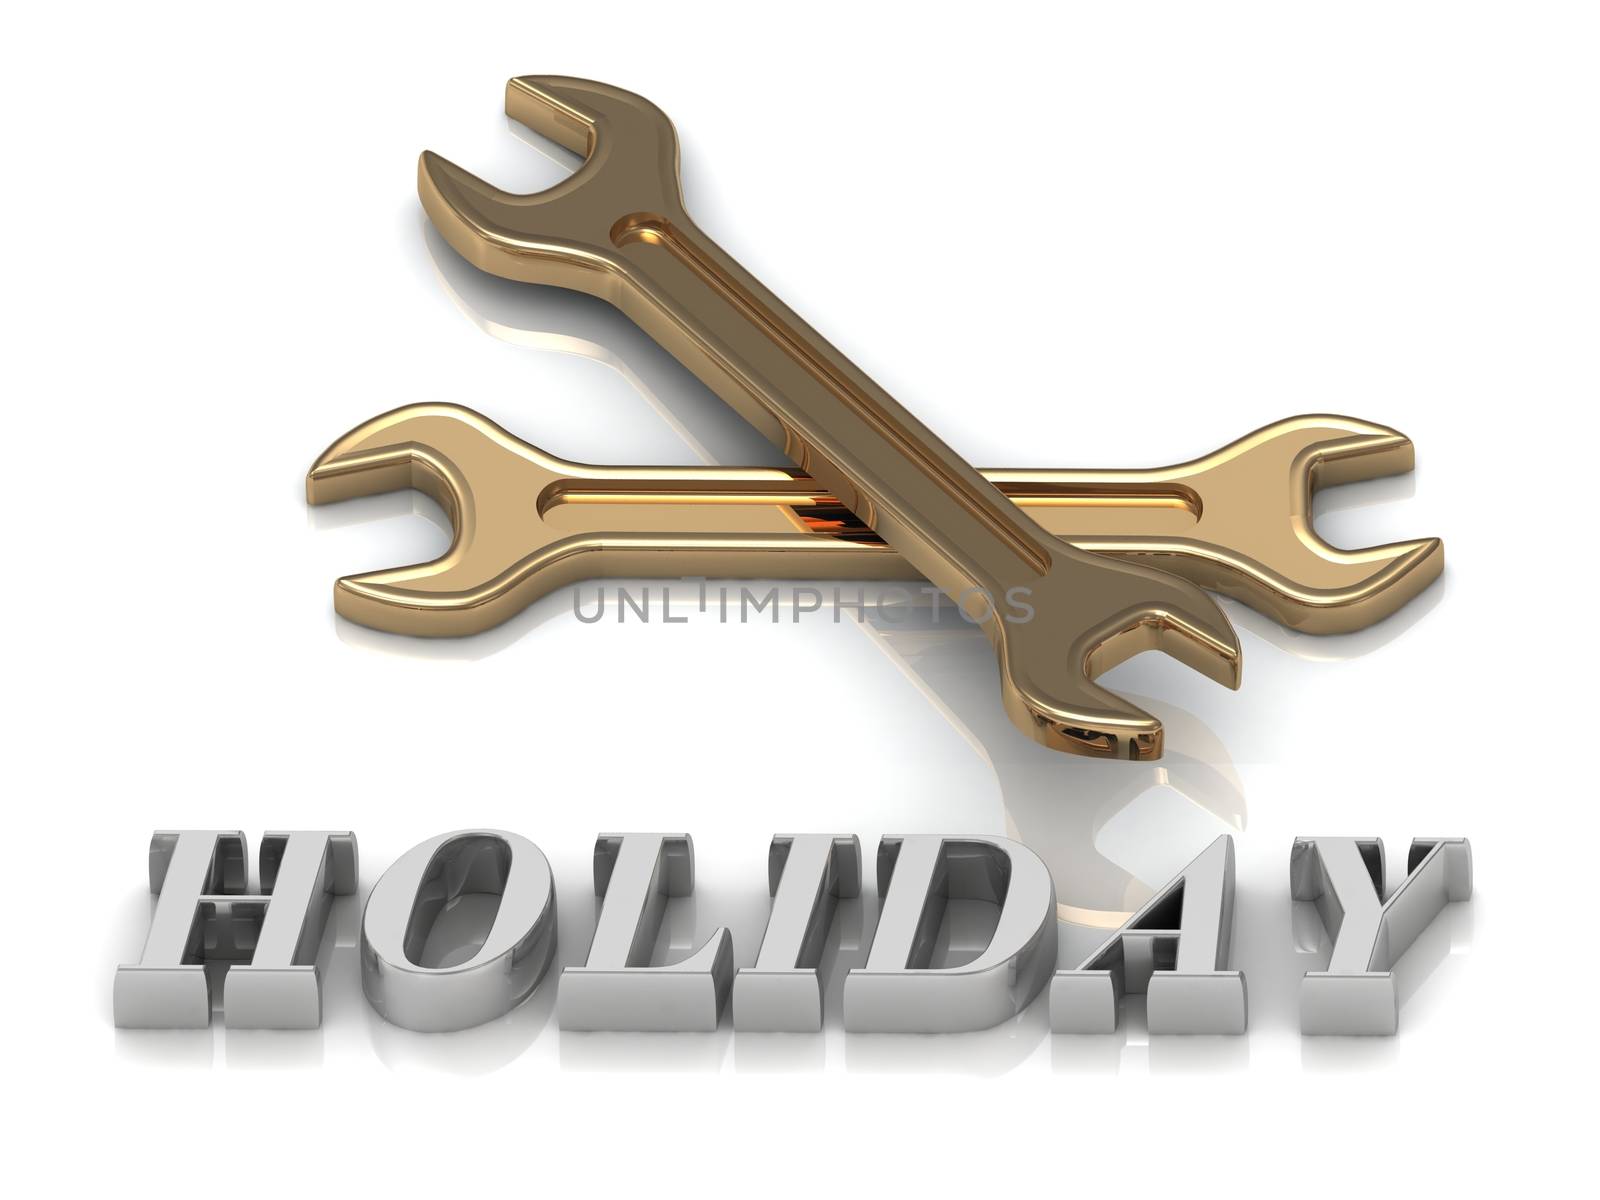 HOLIDAY- inscription of metal letters and 2 keys on white background